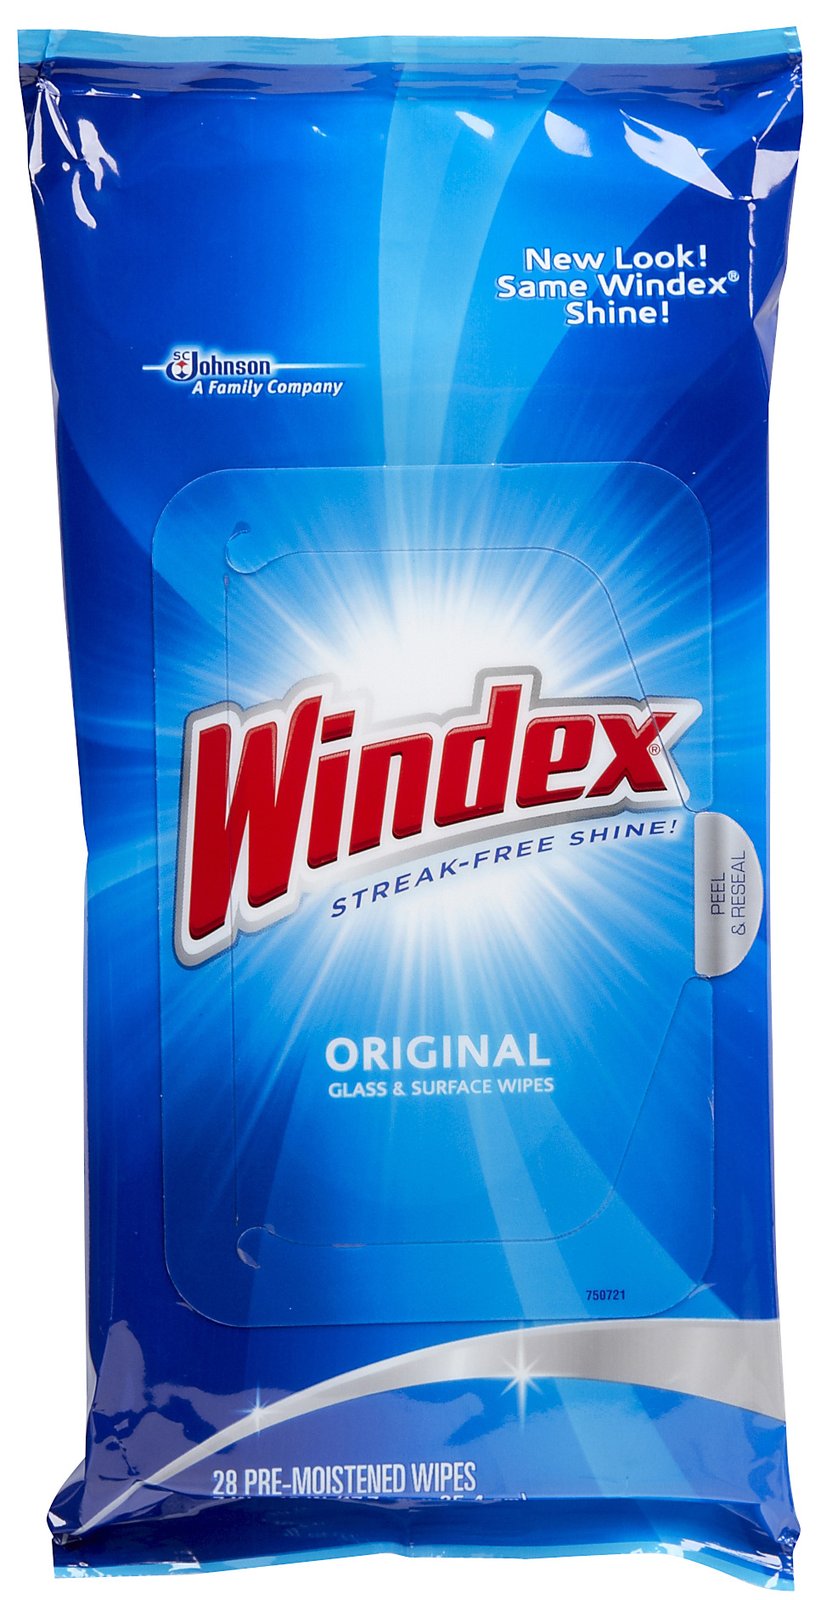 Windex Wipes Only $1.24 at Target